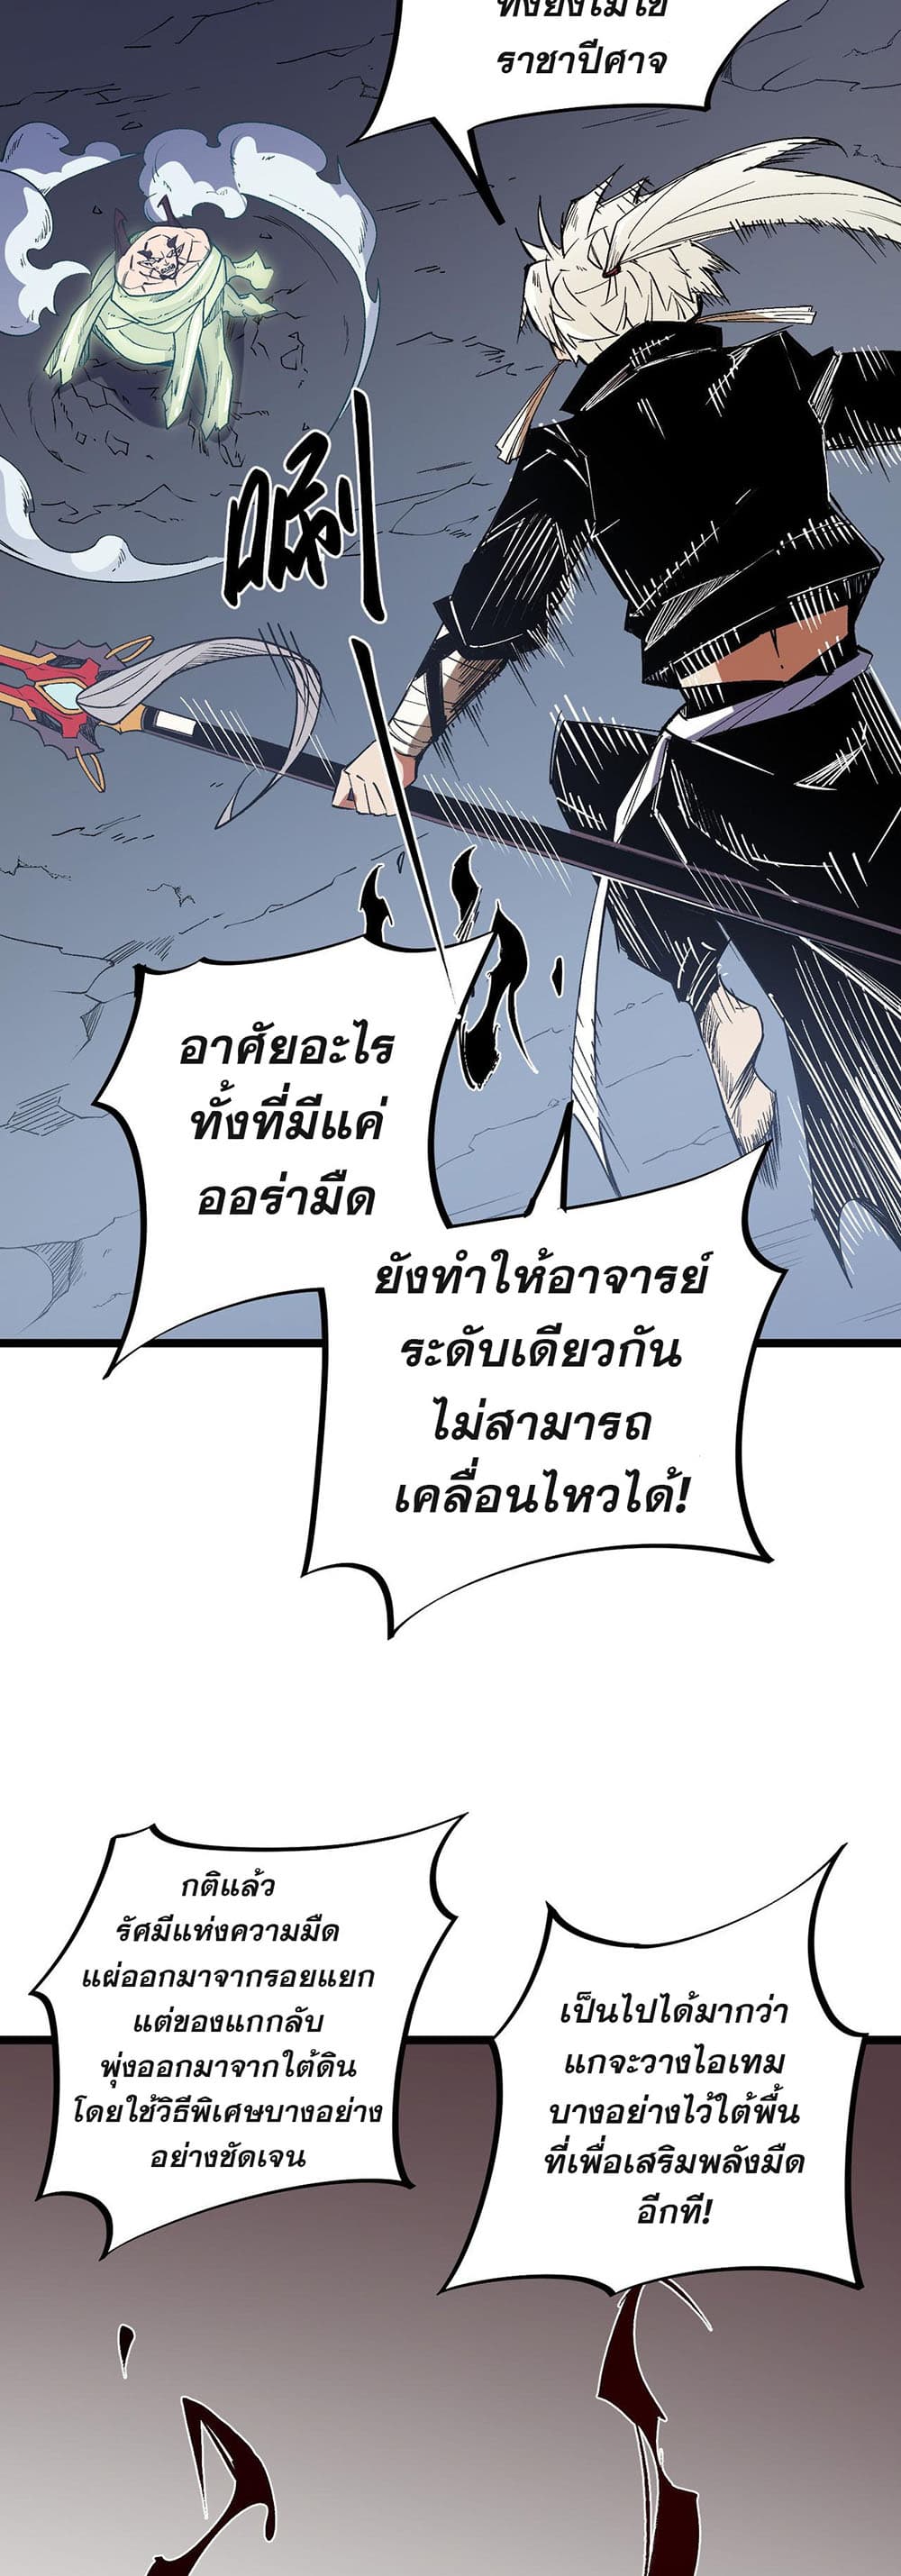 Job Changing for the Entire Population: The Jobless Me Will Terminate the Gods ฉันคือผู้เล่นไร้อาชีพที่สังหารเหล่าเทพ 52-52